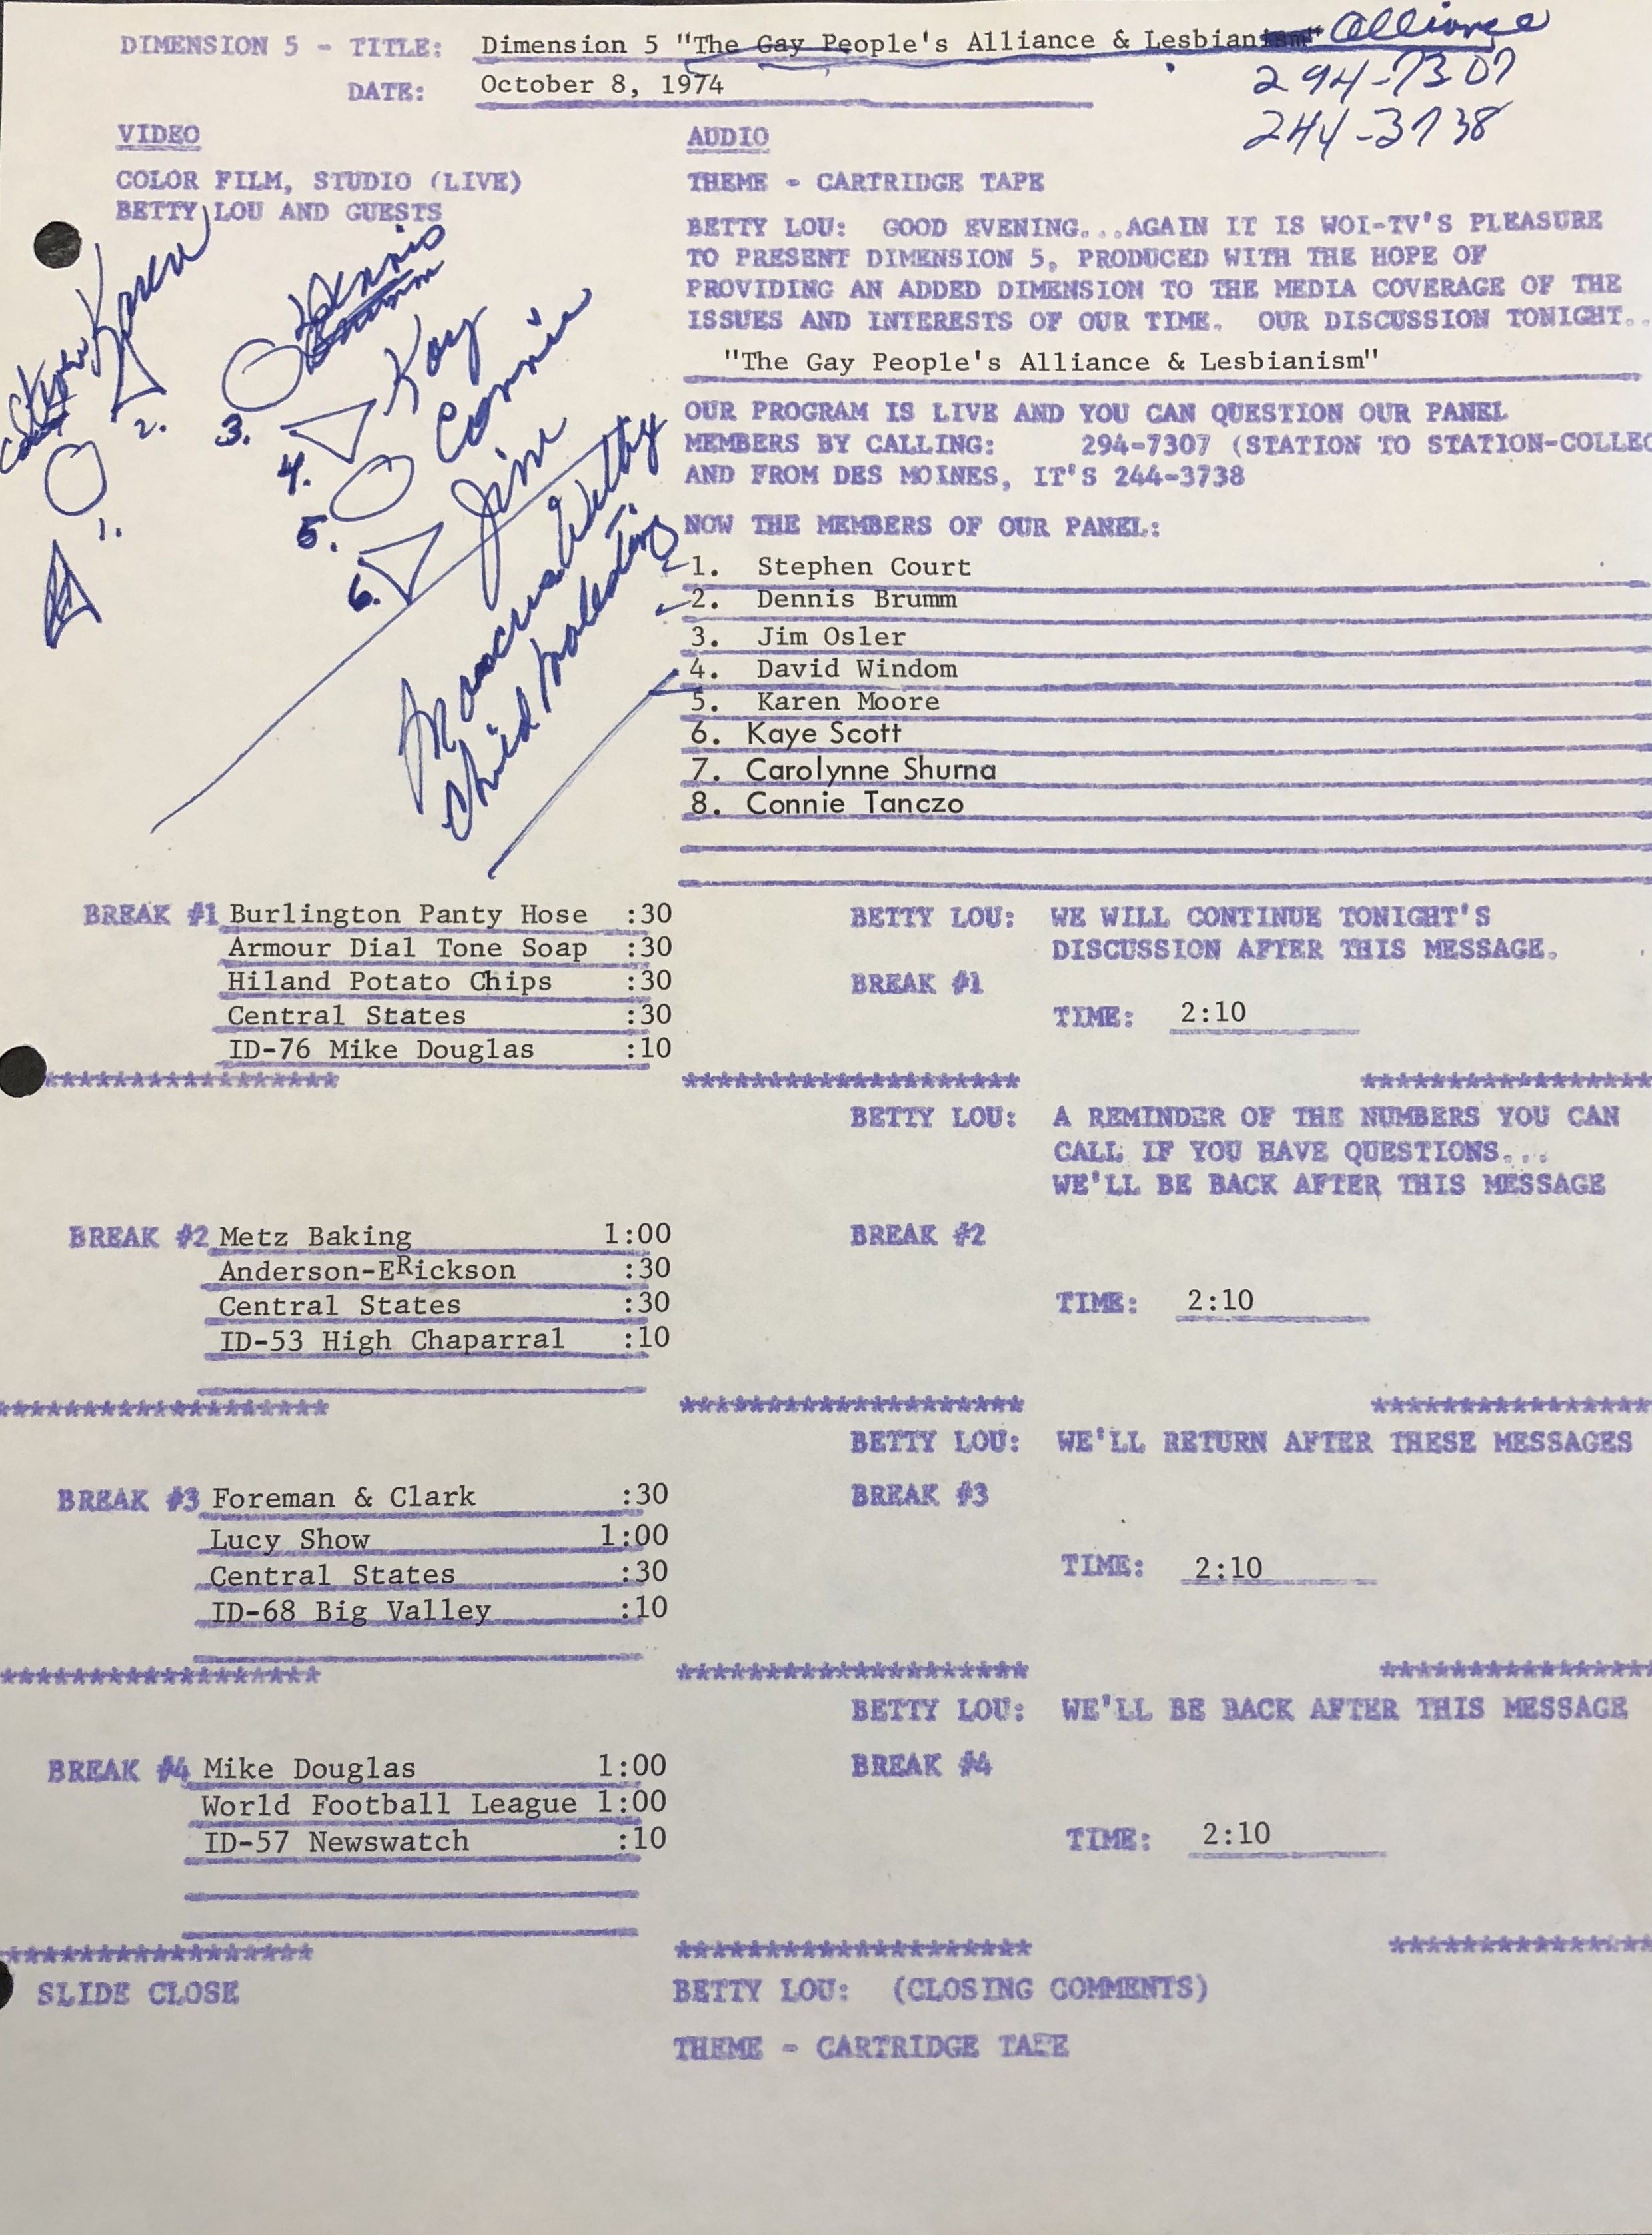 Broadcast notes from collection RS 5/6/53